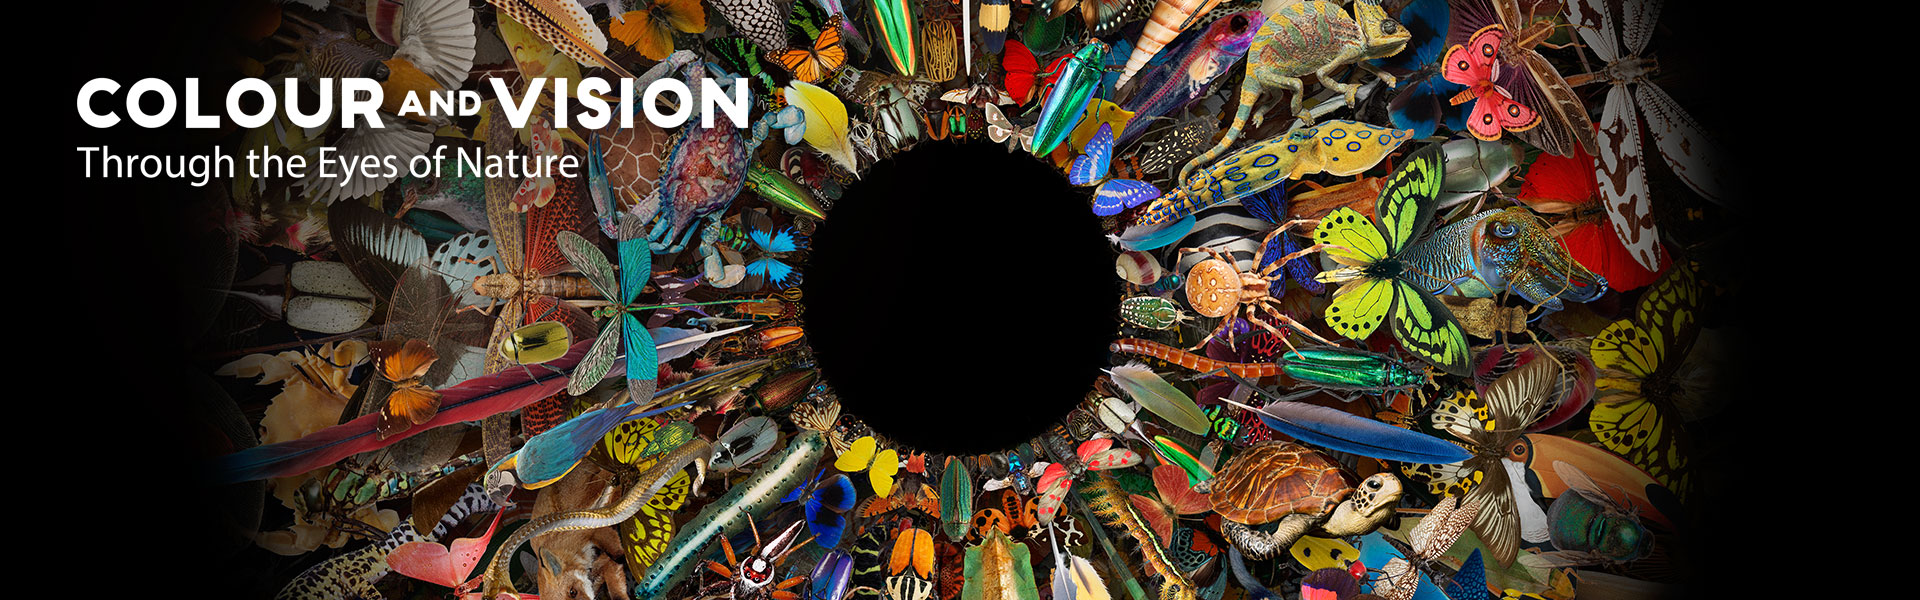 Colour and Vision | Natural History Museum